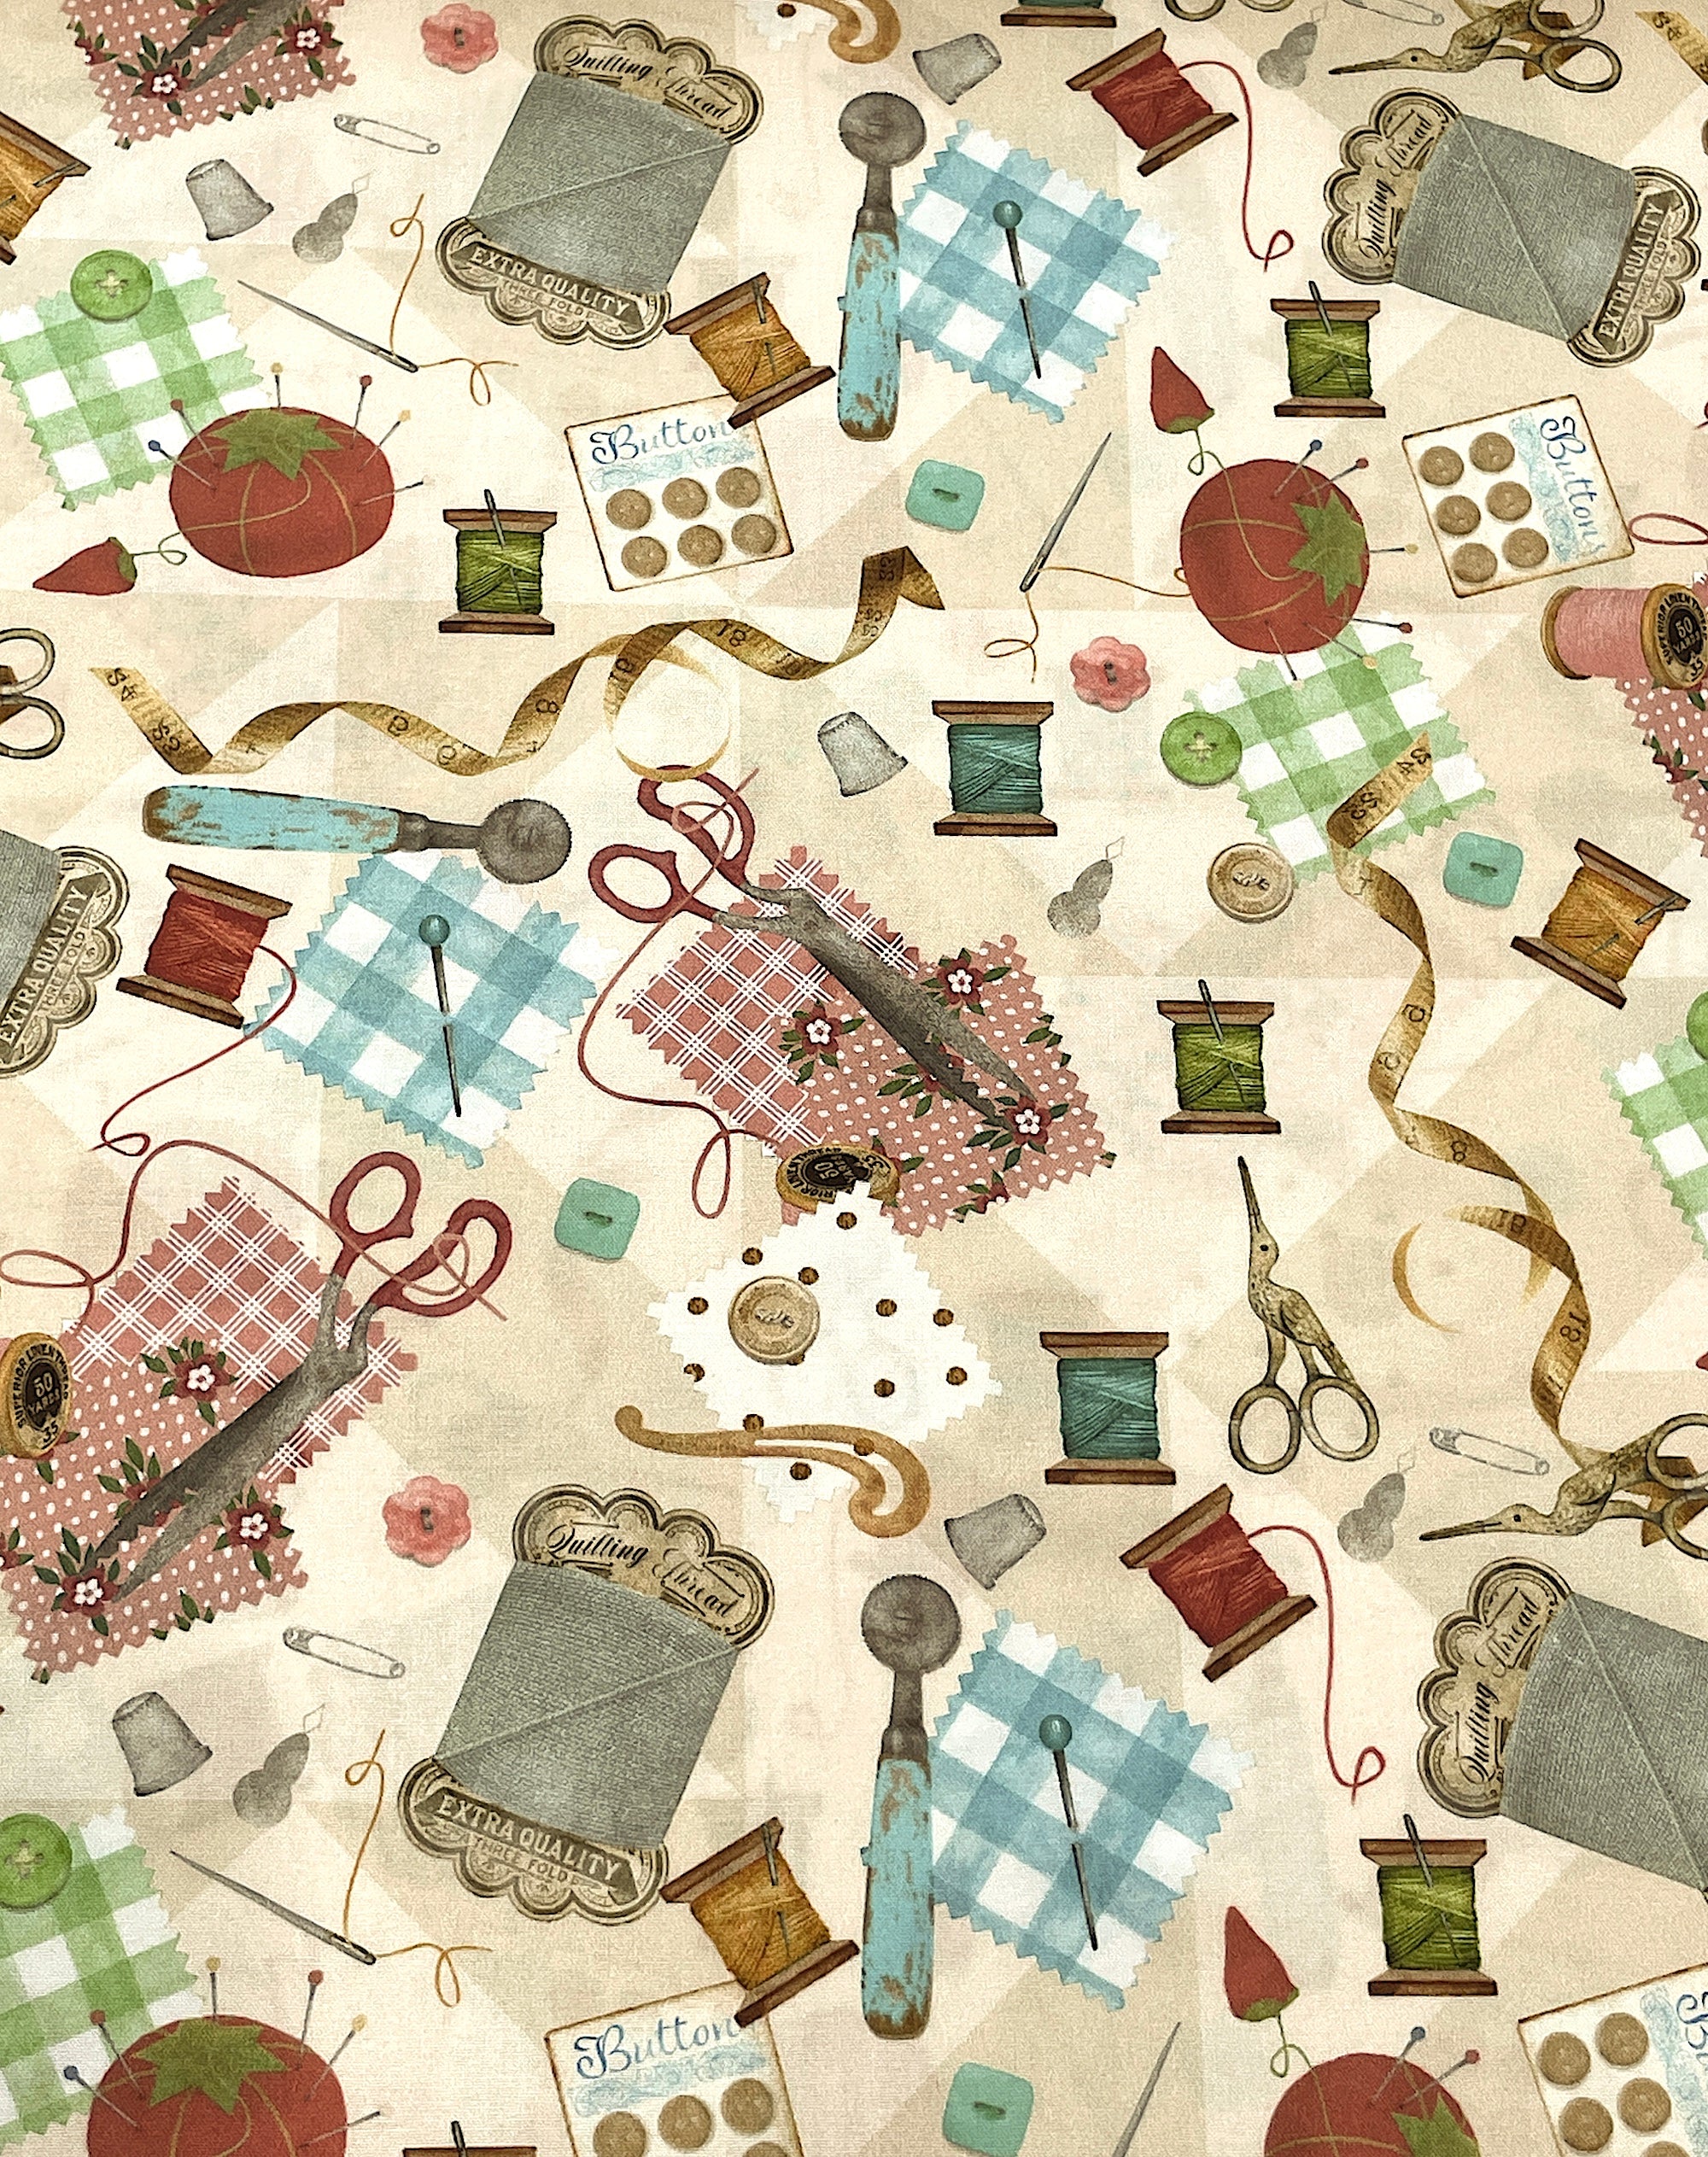 This fabric is part of the Shop Hop Collection by Beth Albert.&nbsp; This fabric is covered with sewing notions such as thread, scissors, needles, tape measures, thimbles, buttons, sewing machines and more.